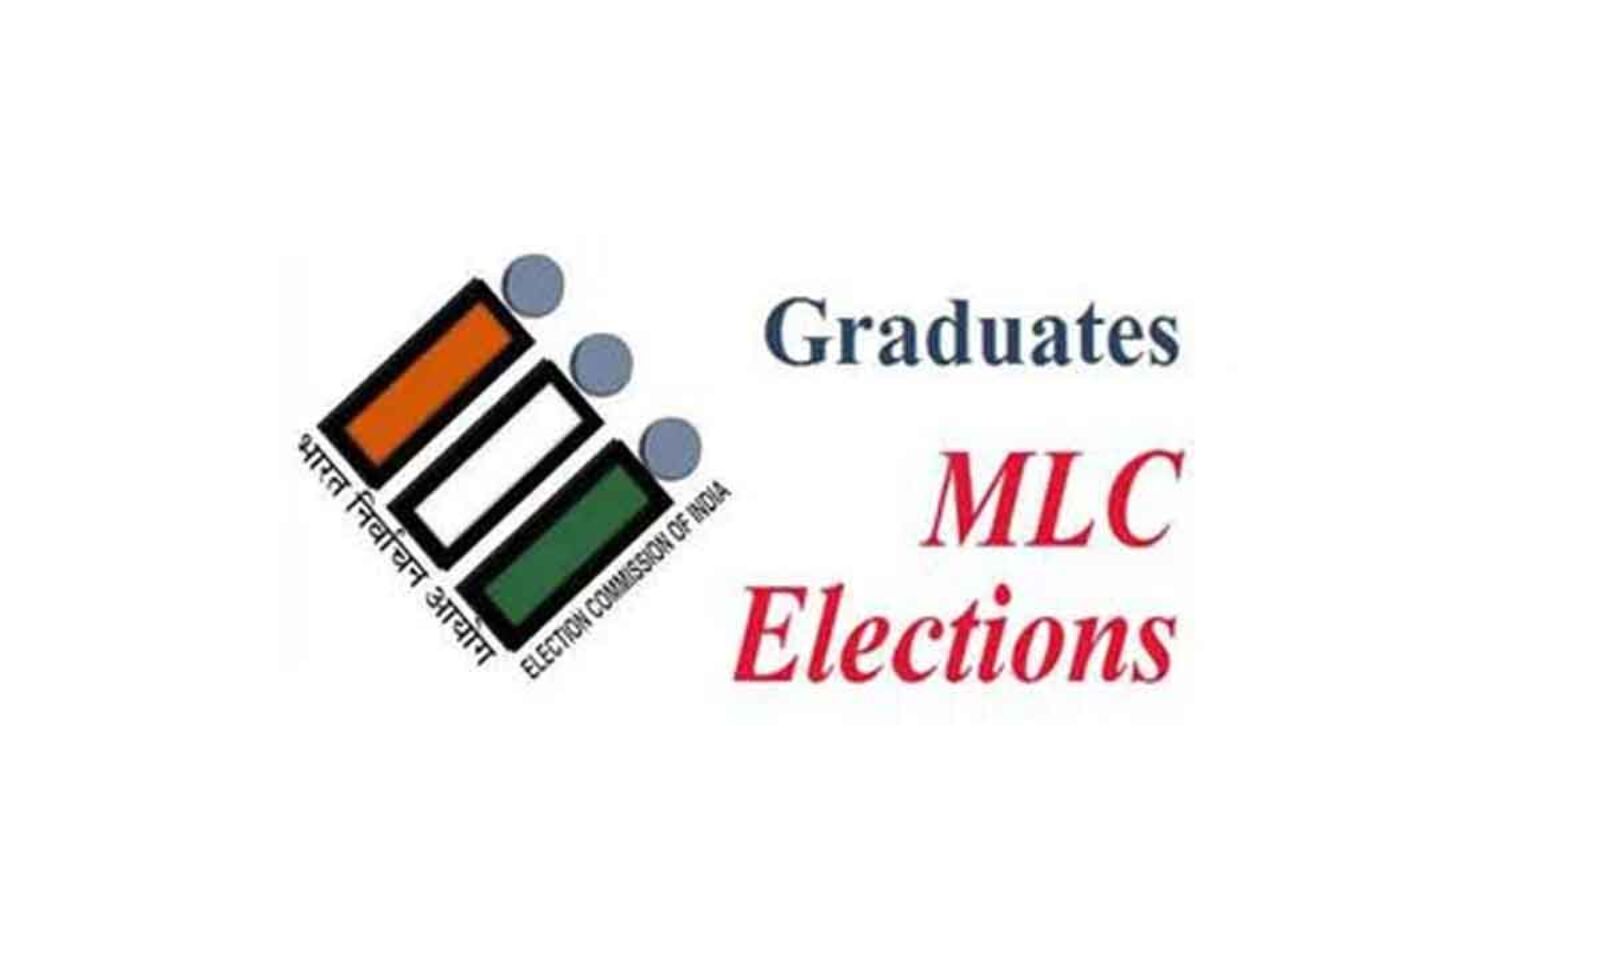 52 Remain in Fray for Graduate MLC Elections